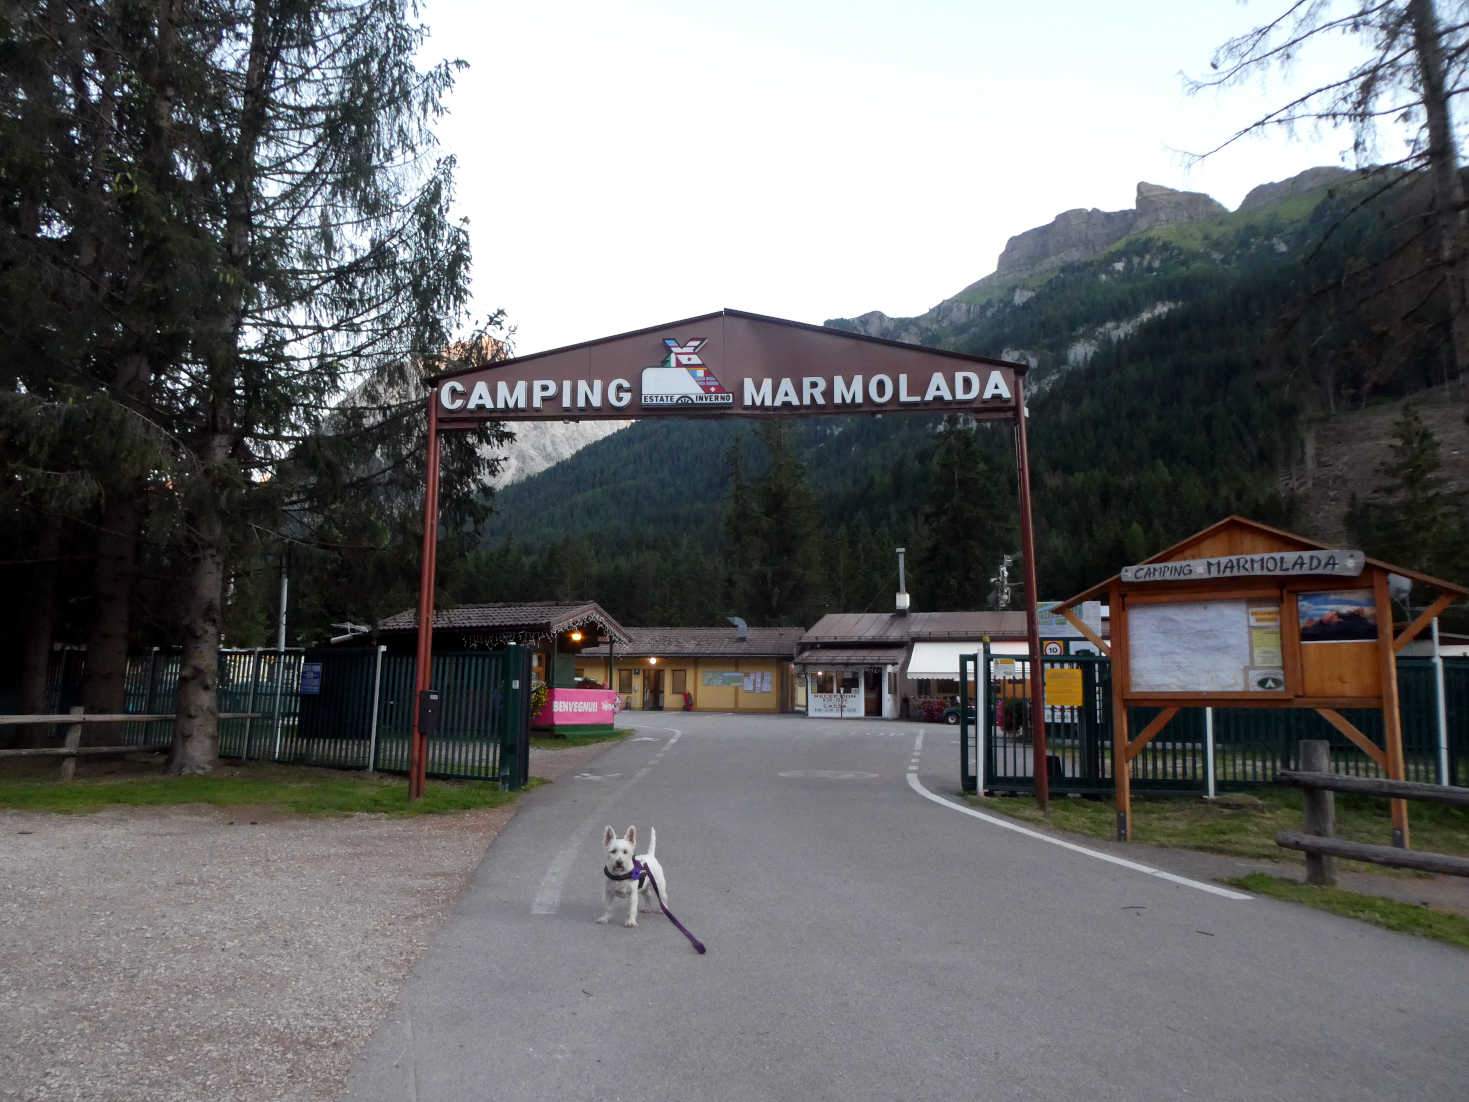 poppy the westie outside camping Marmolada